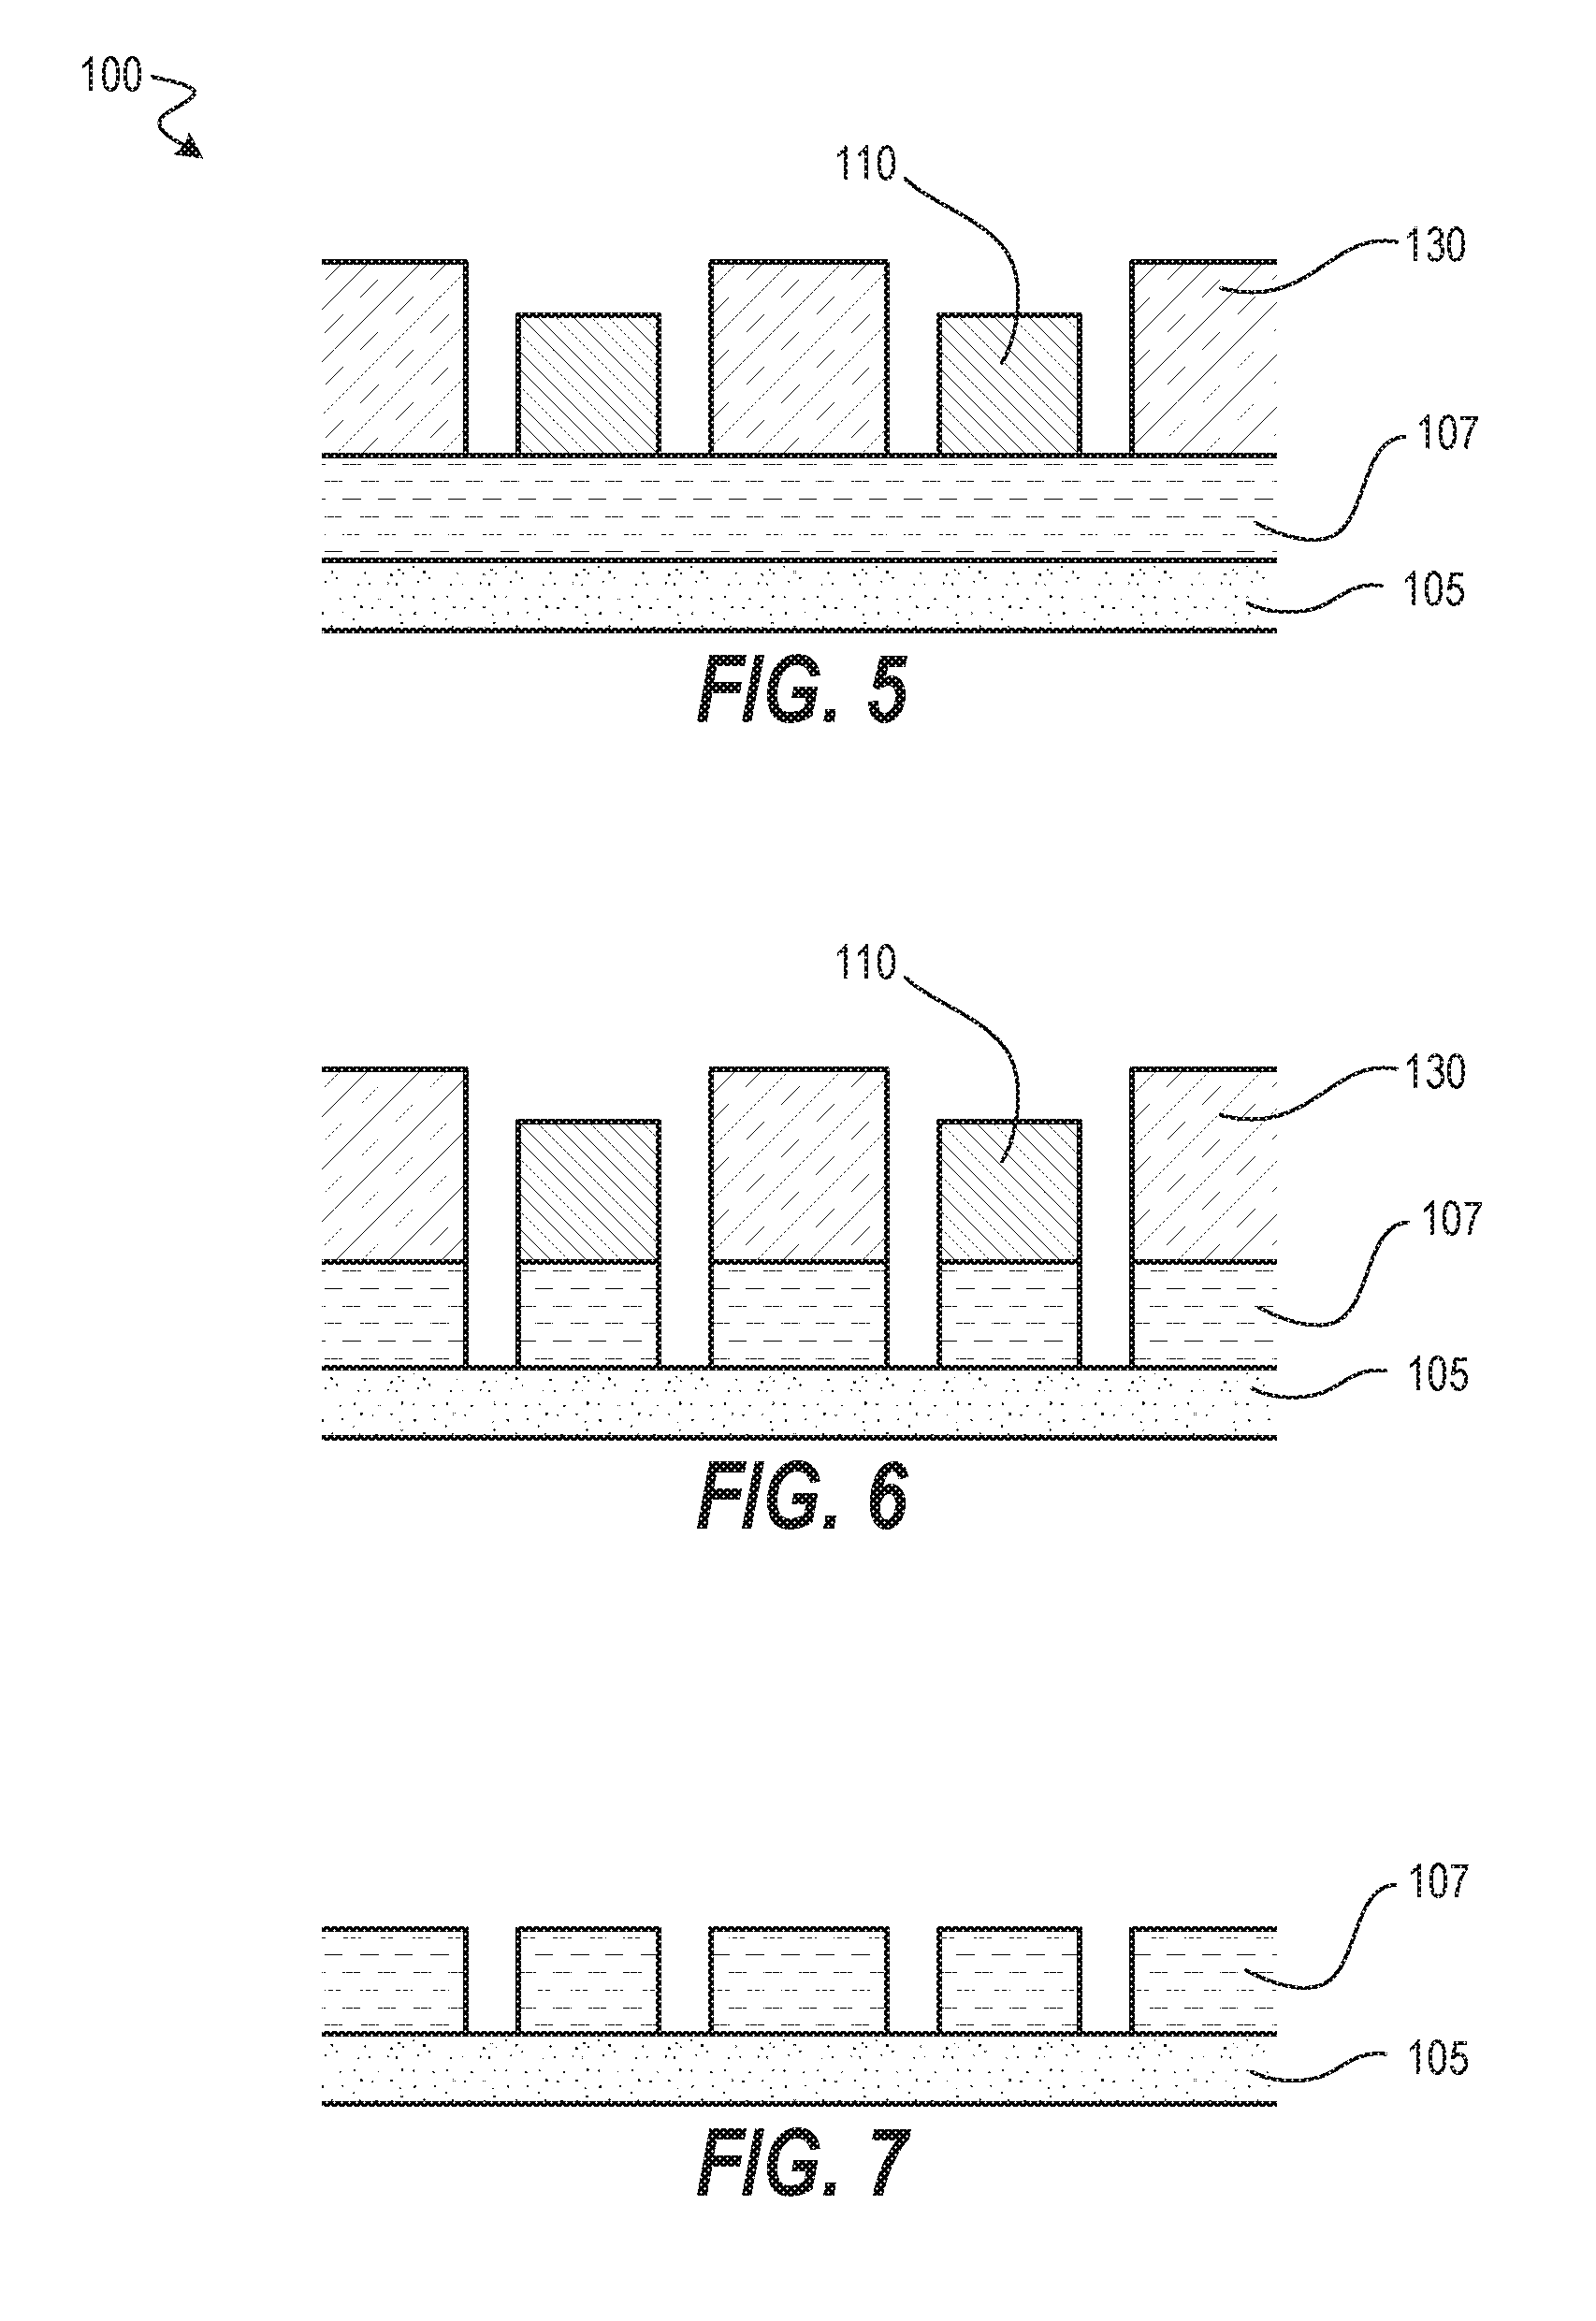 Patterning a Substrate Using Grafting Polymer Material